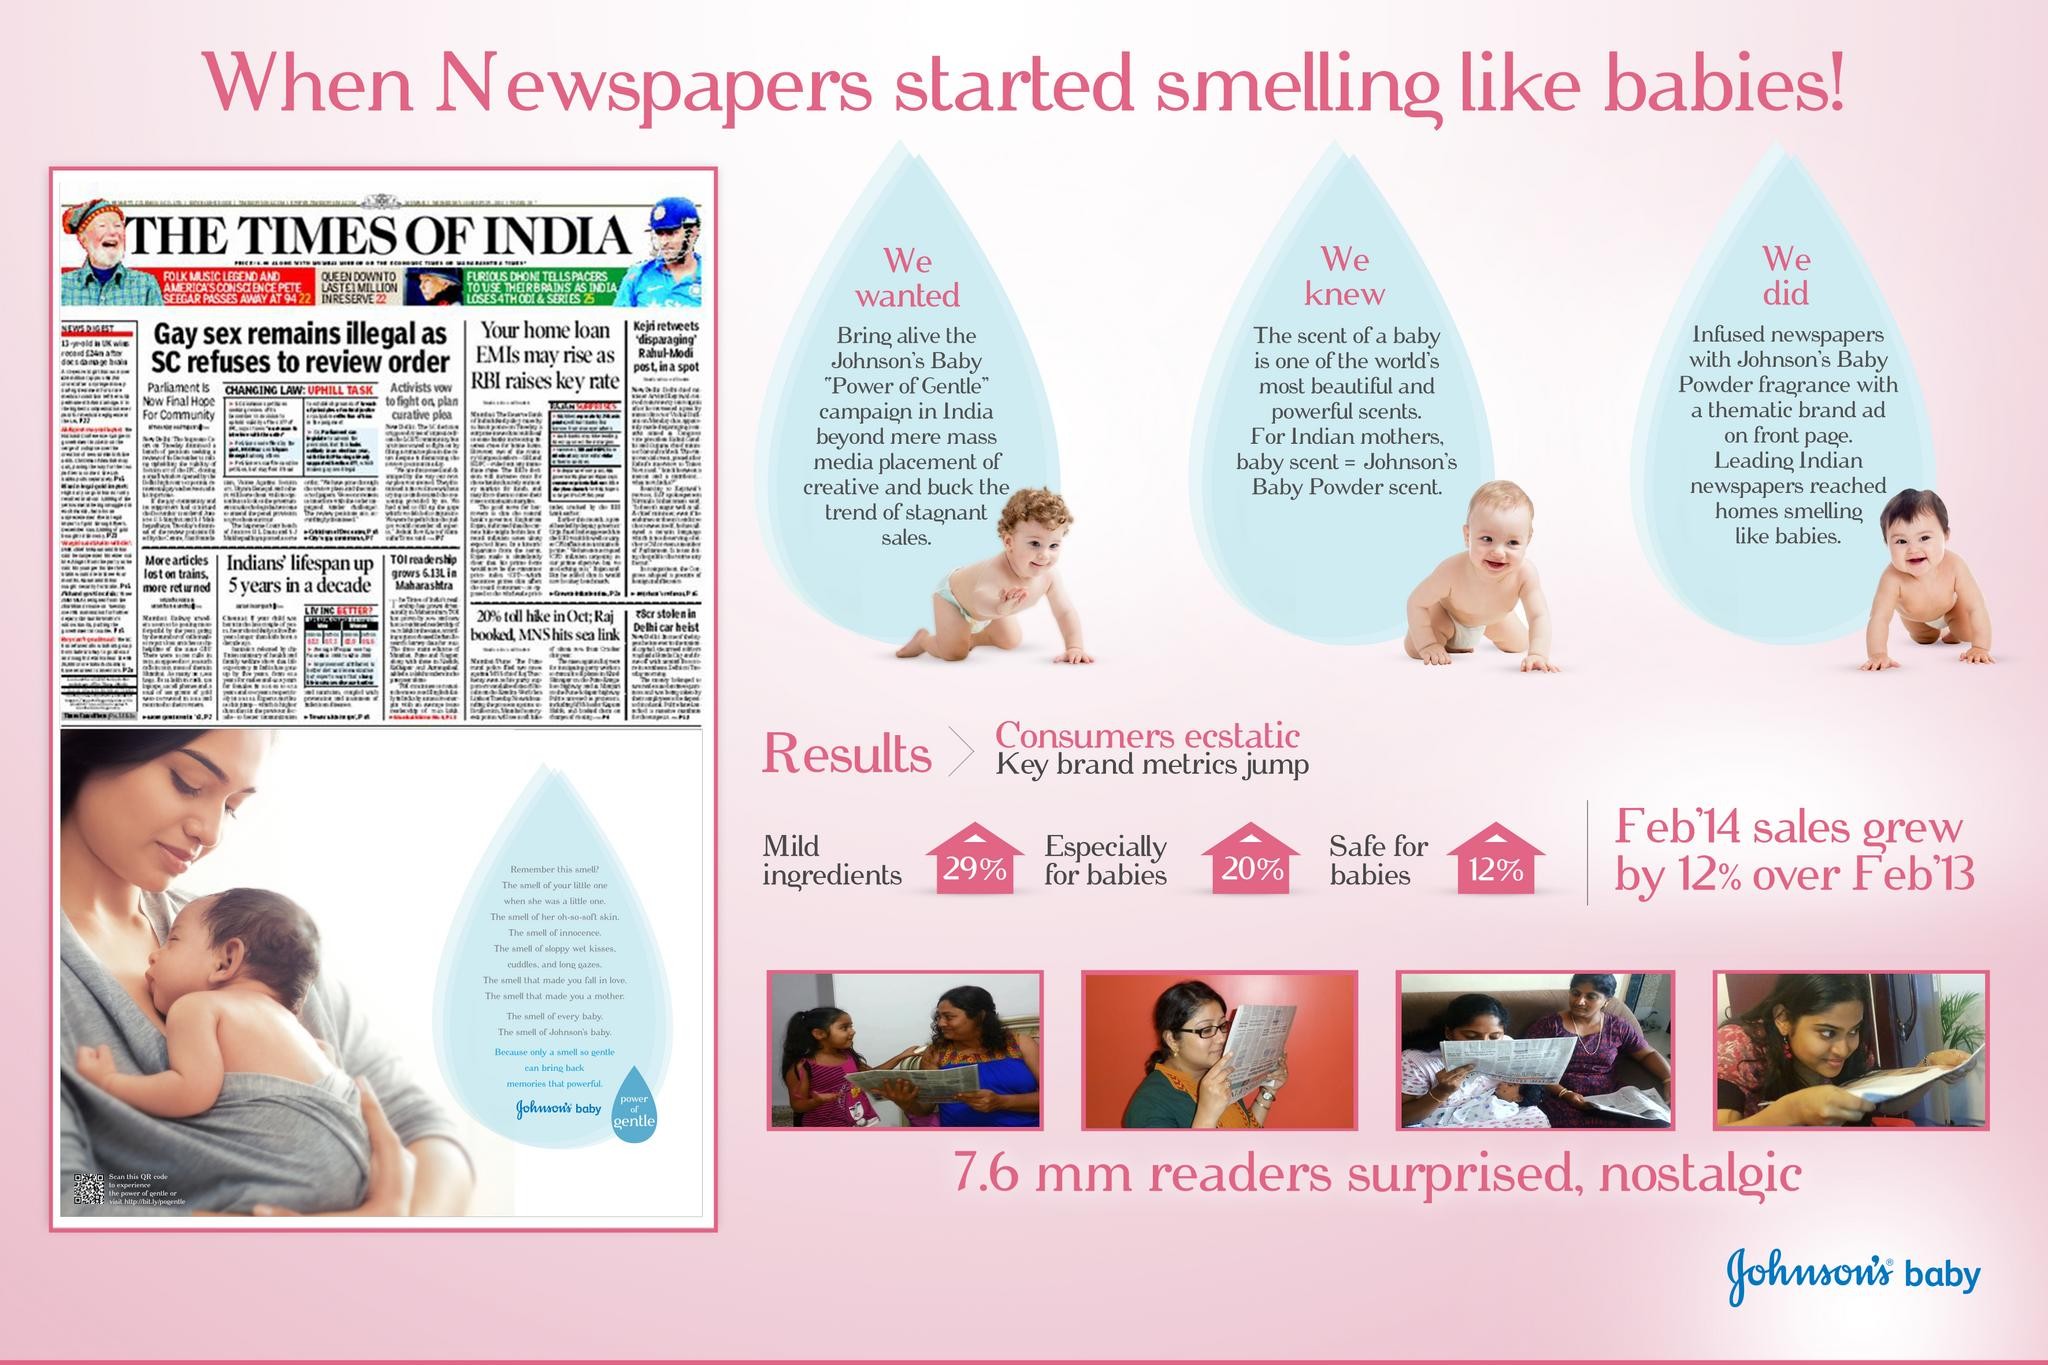 WHEN NEWSPAPERS STARTED SMELLING LIKE BABIES!